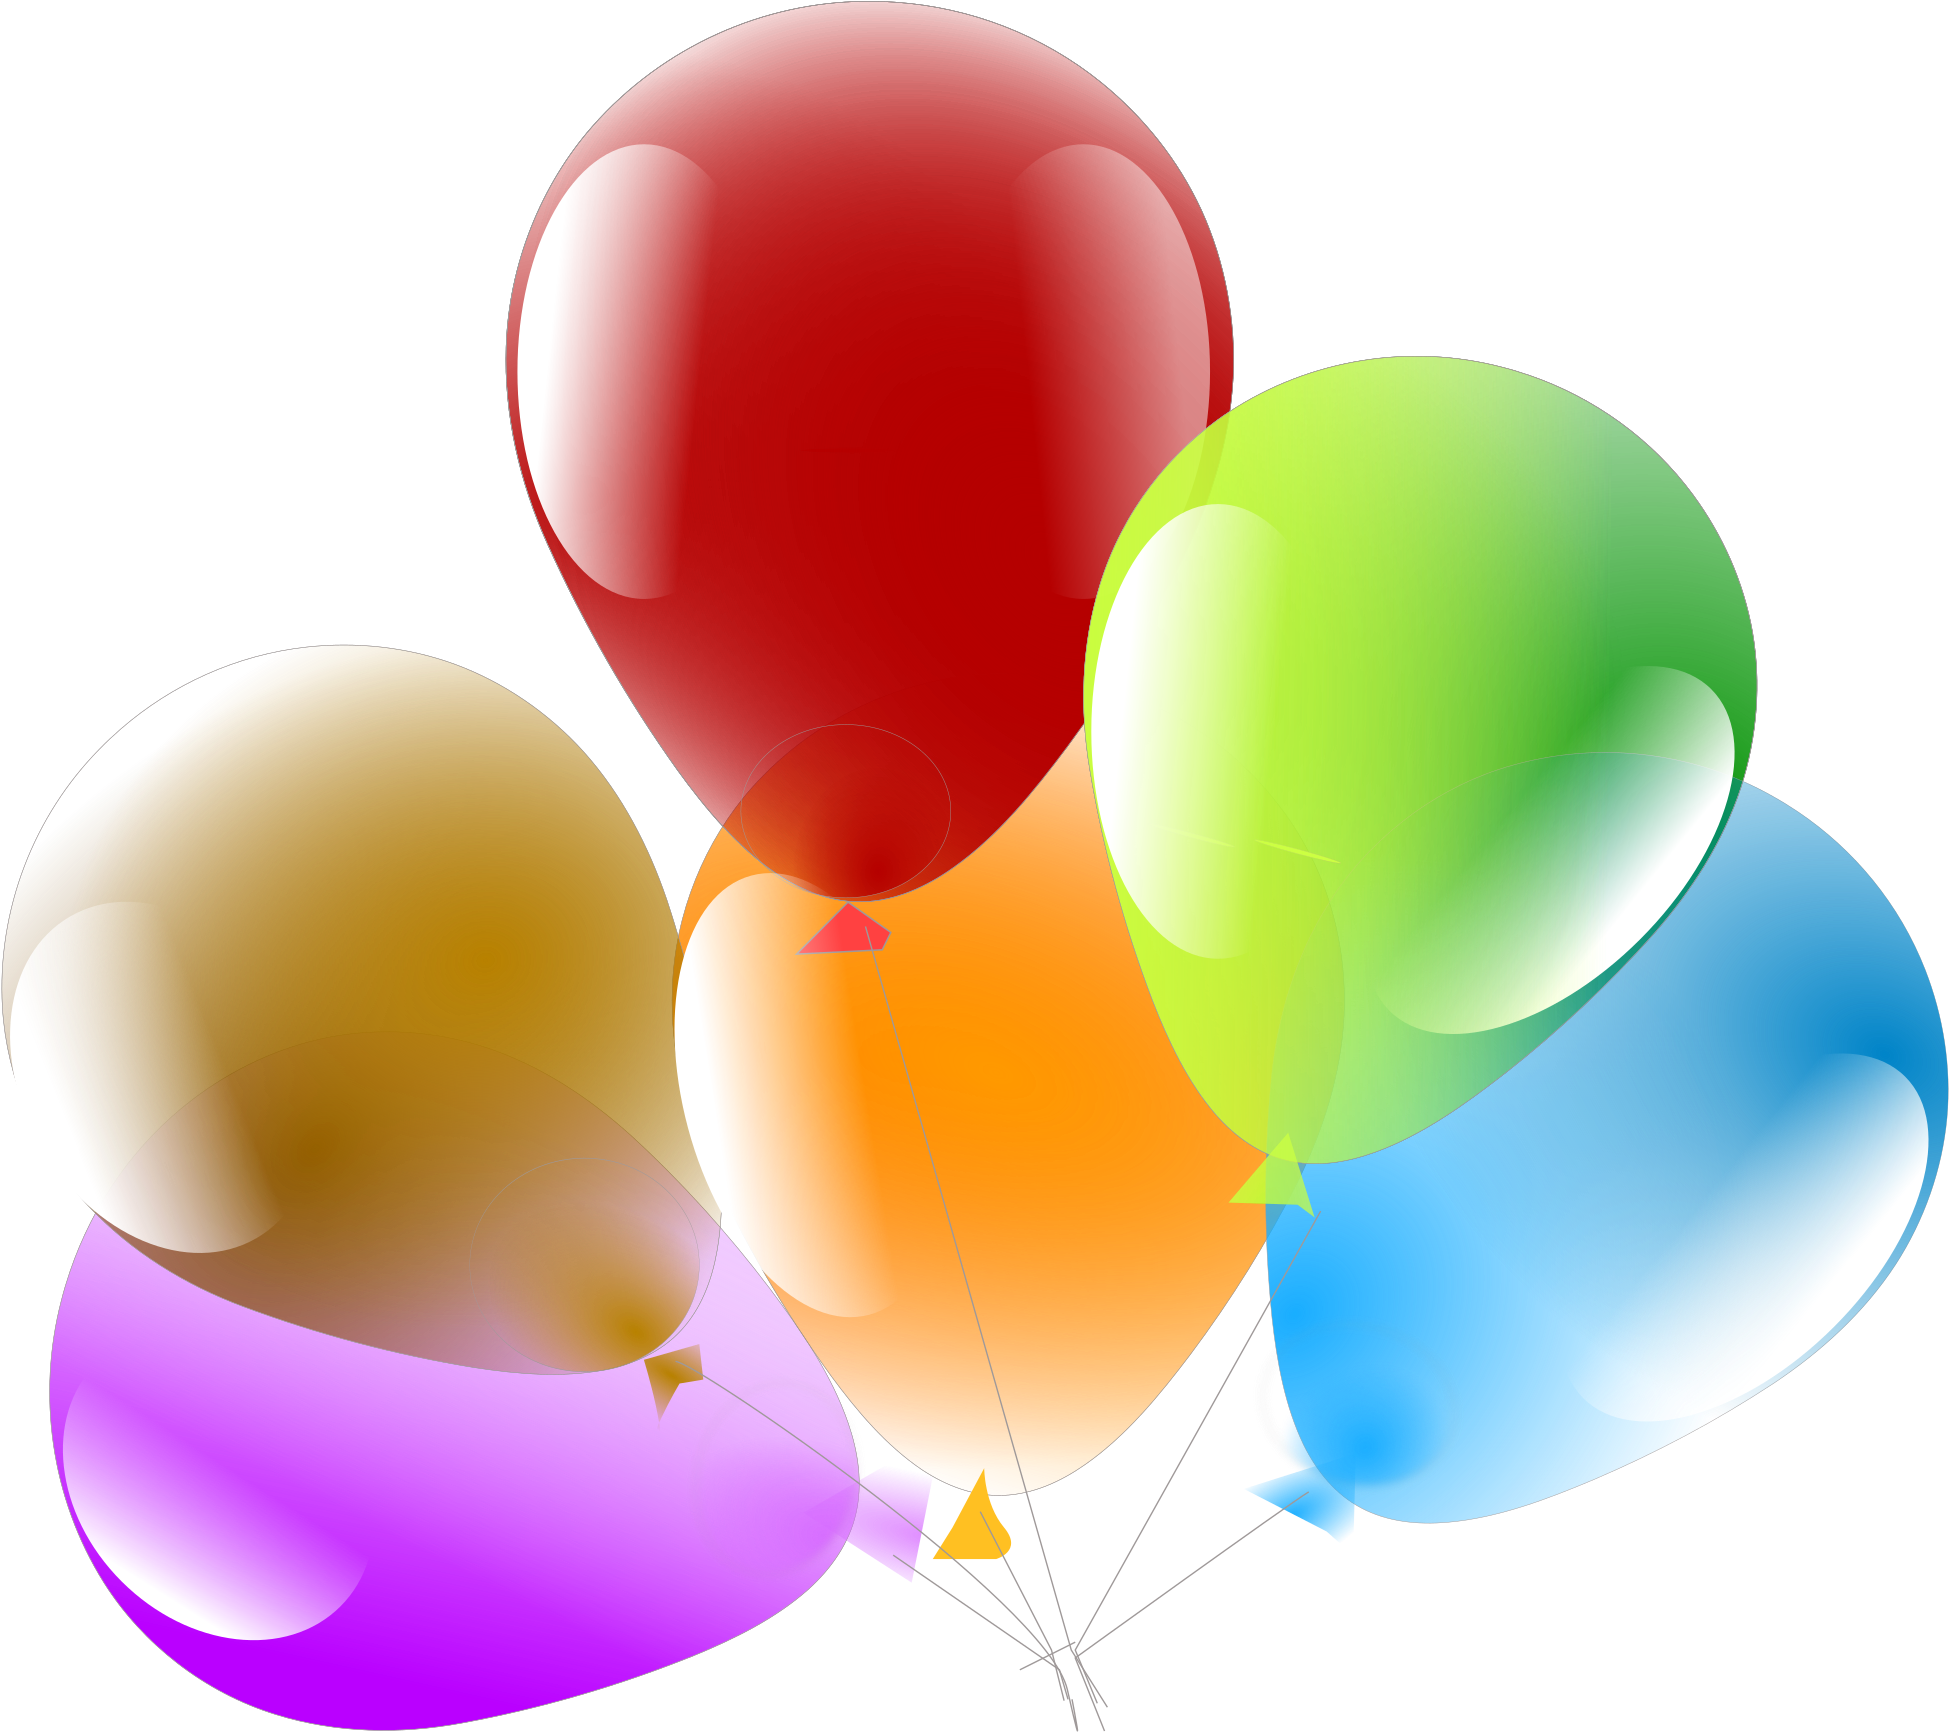 Balloons Svg - Clipart Library - Clipart Library - Balloon Designs Png (2400x1800)